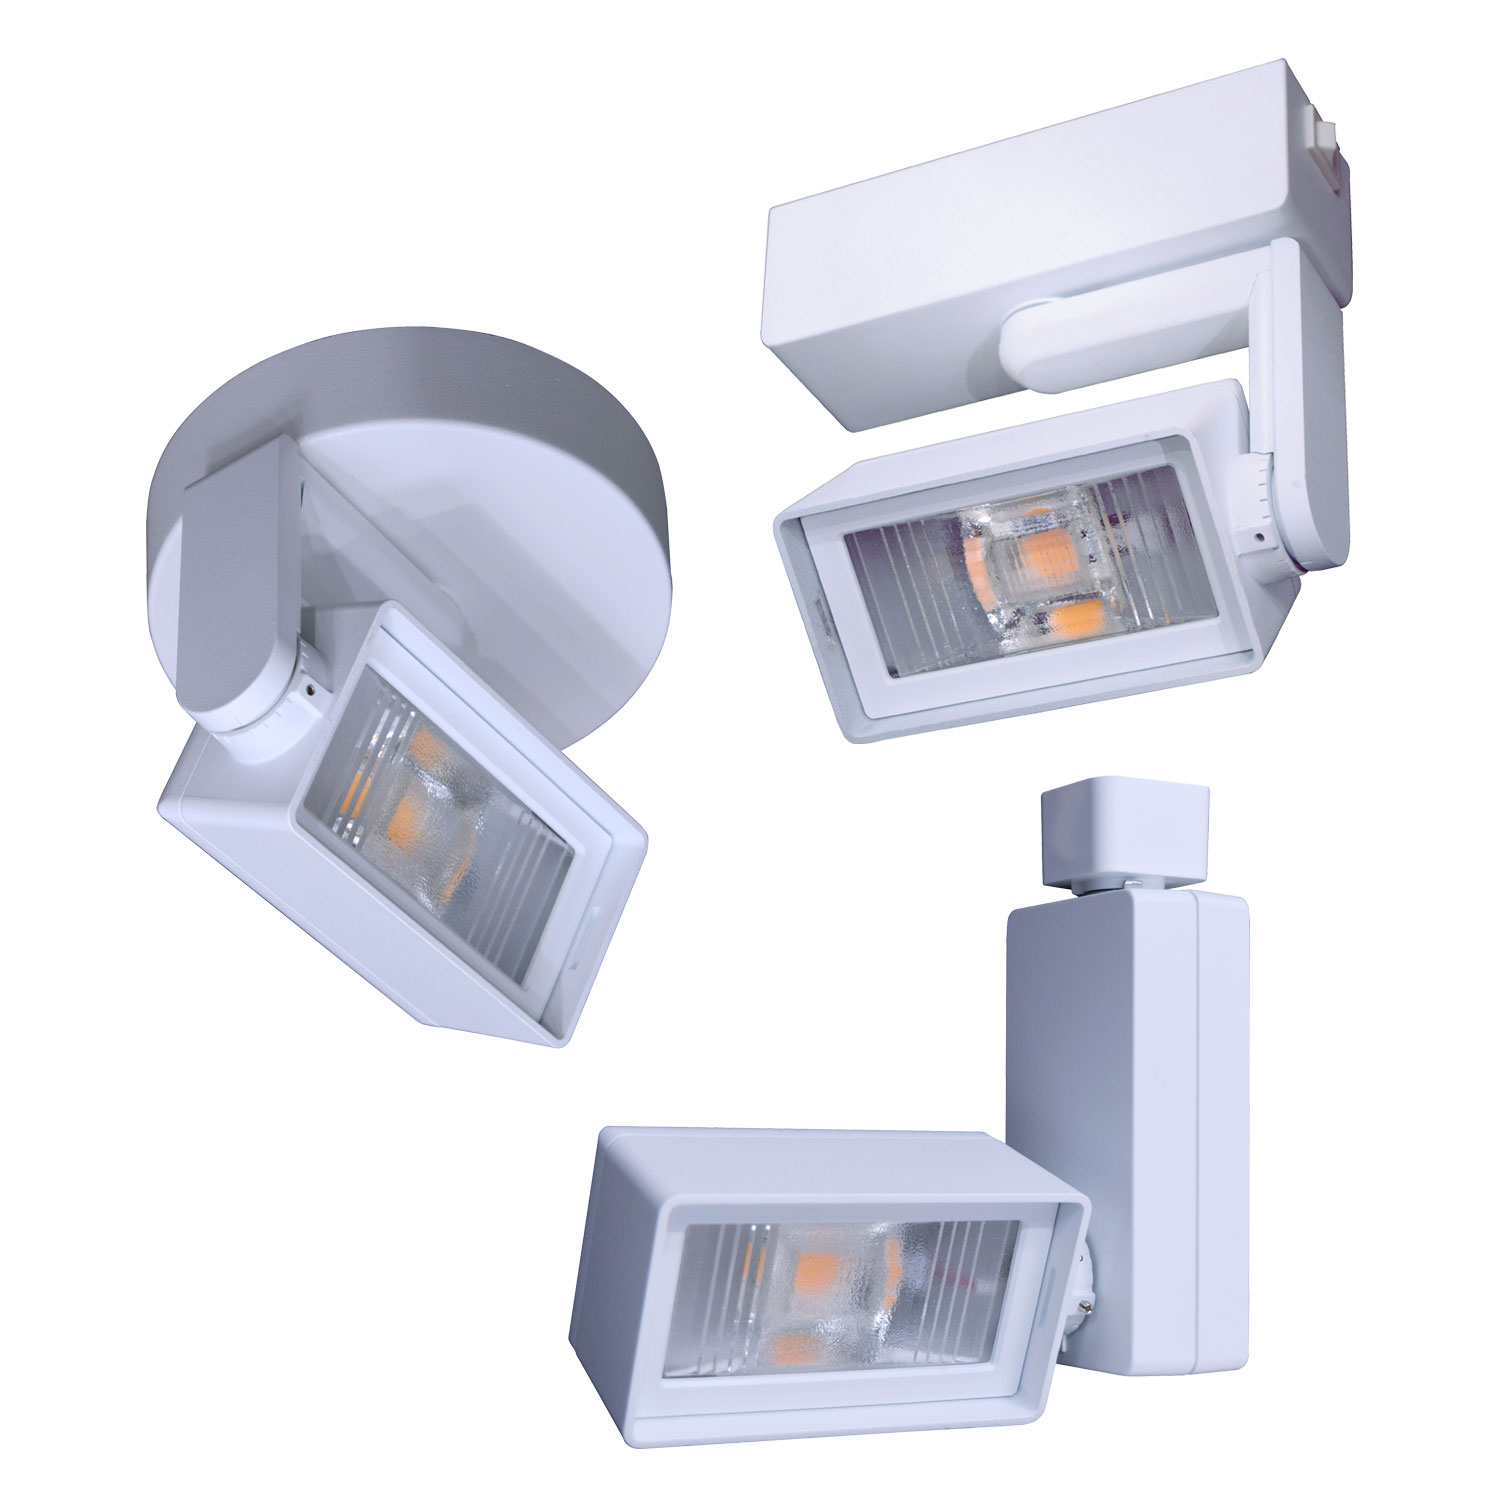 ConTech Introduces New Mini Stealth Wall Wash/Flood Luminaires